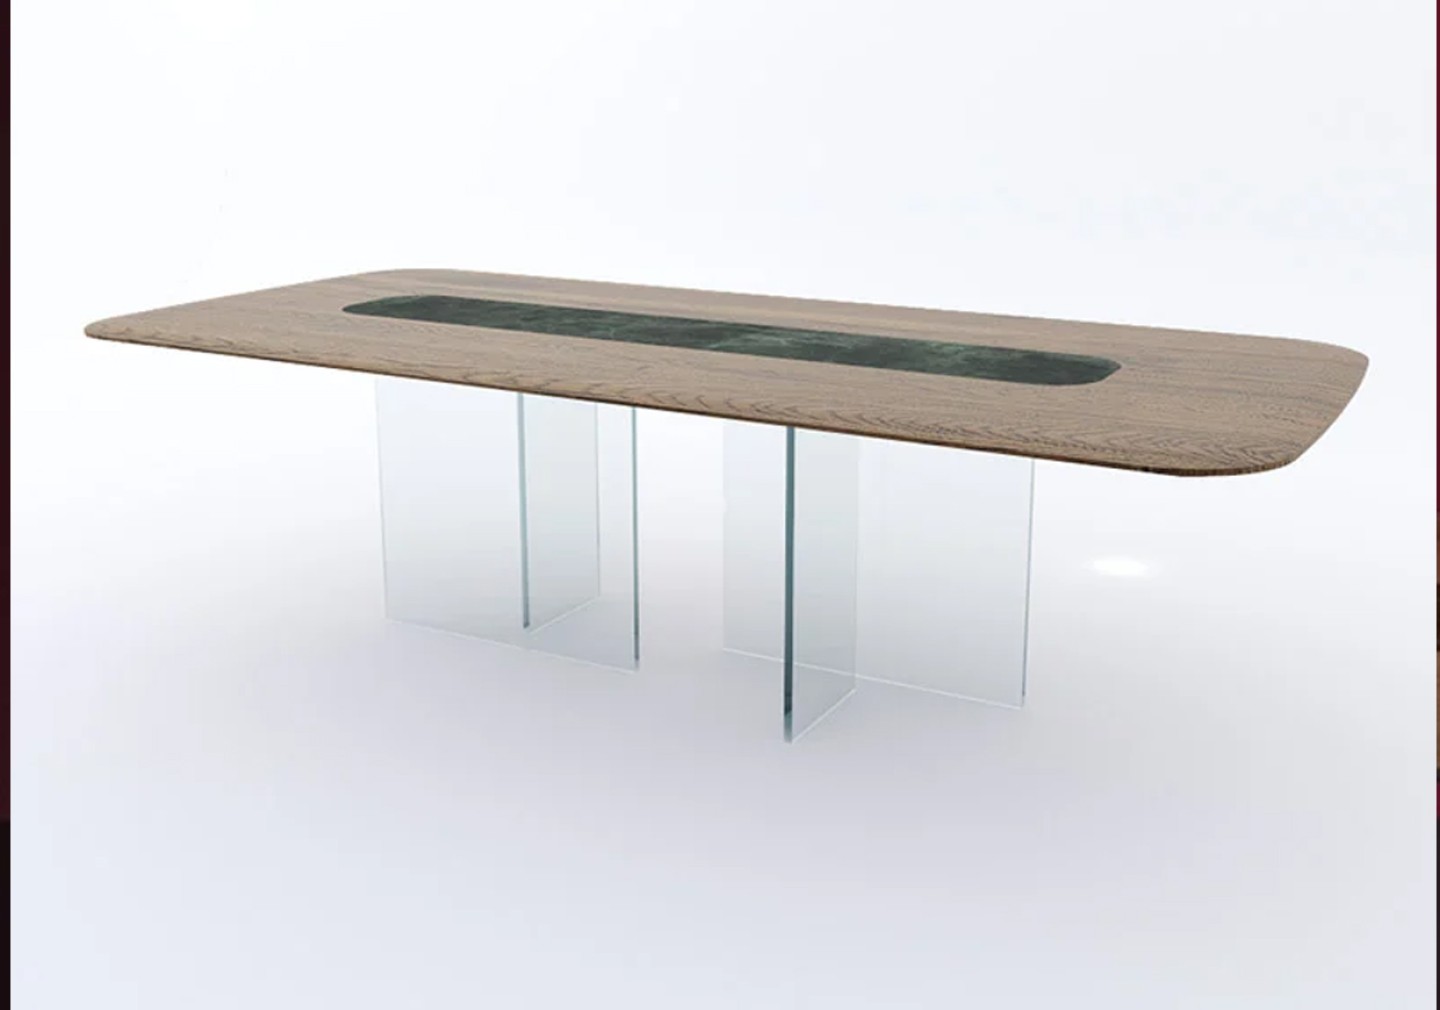 THE NEW YORK MY GLASS DINING TABLE  BY DEVINA NAIS